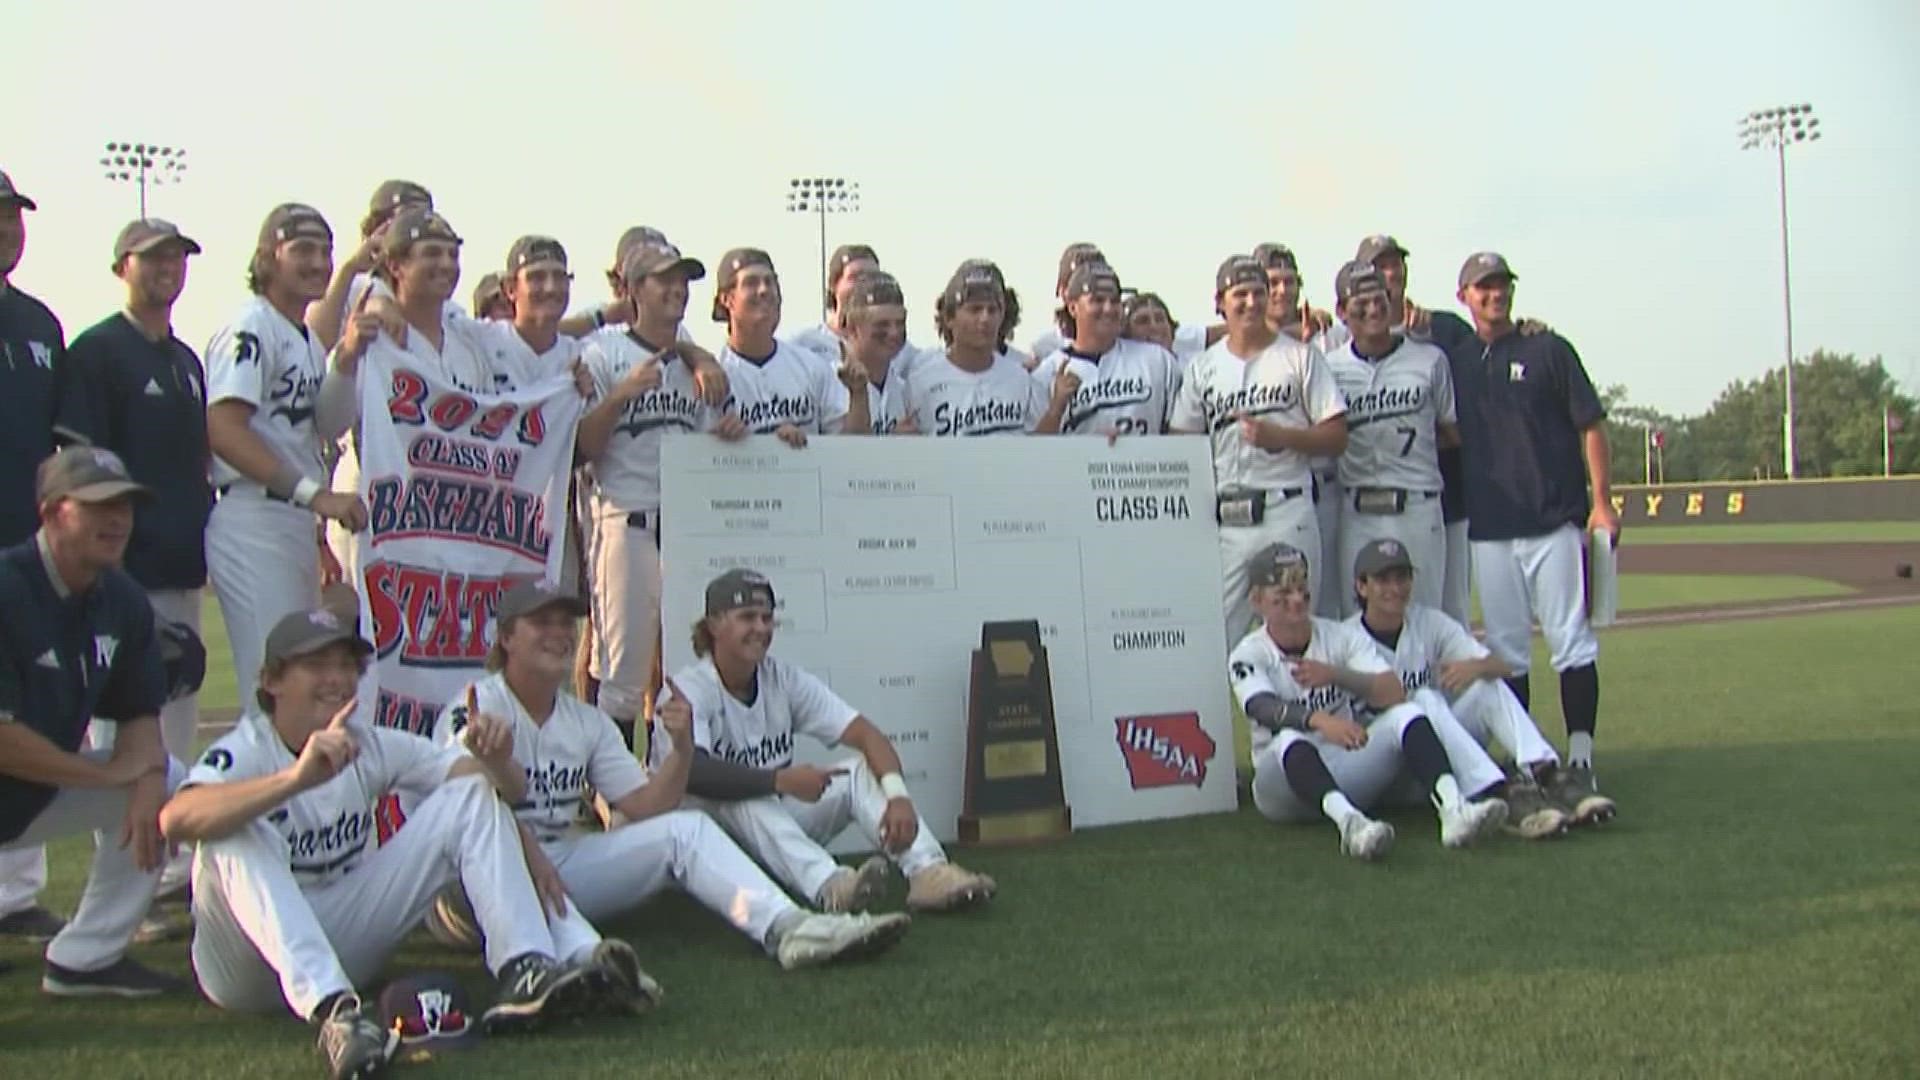 State champions at last. The Spartans earn their first ever baseball state title with the 14-5 victory over Johnston.